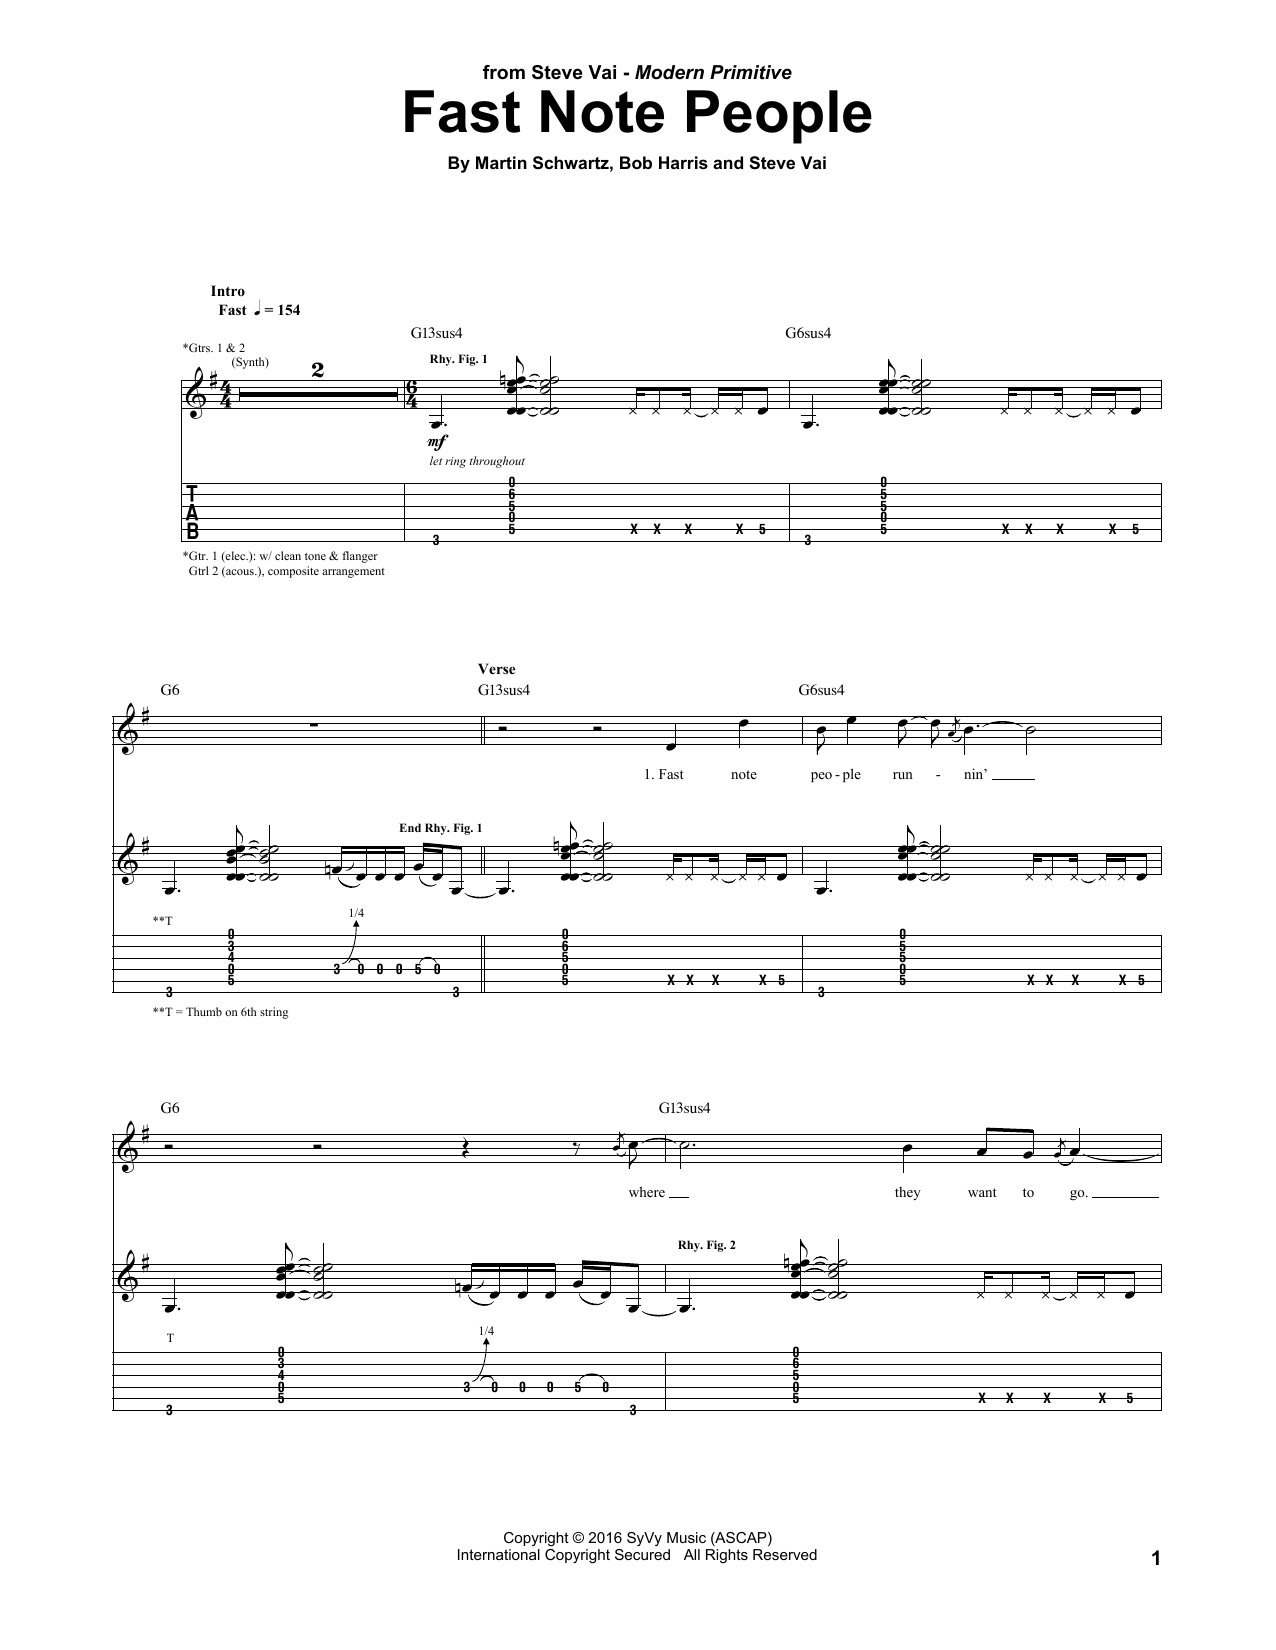 Download Steve Vai Fast Note People Sheet Music